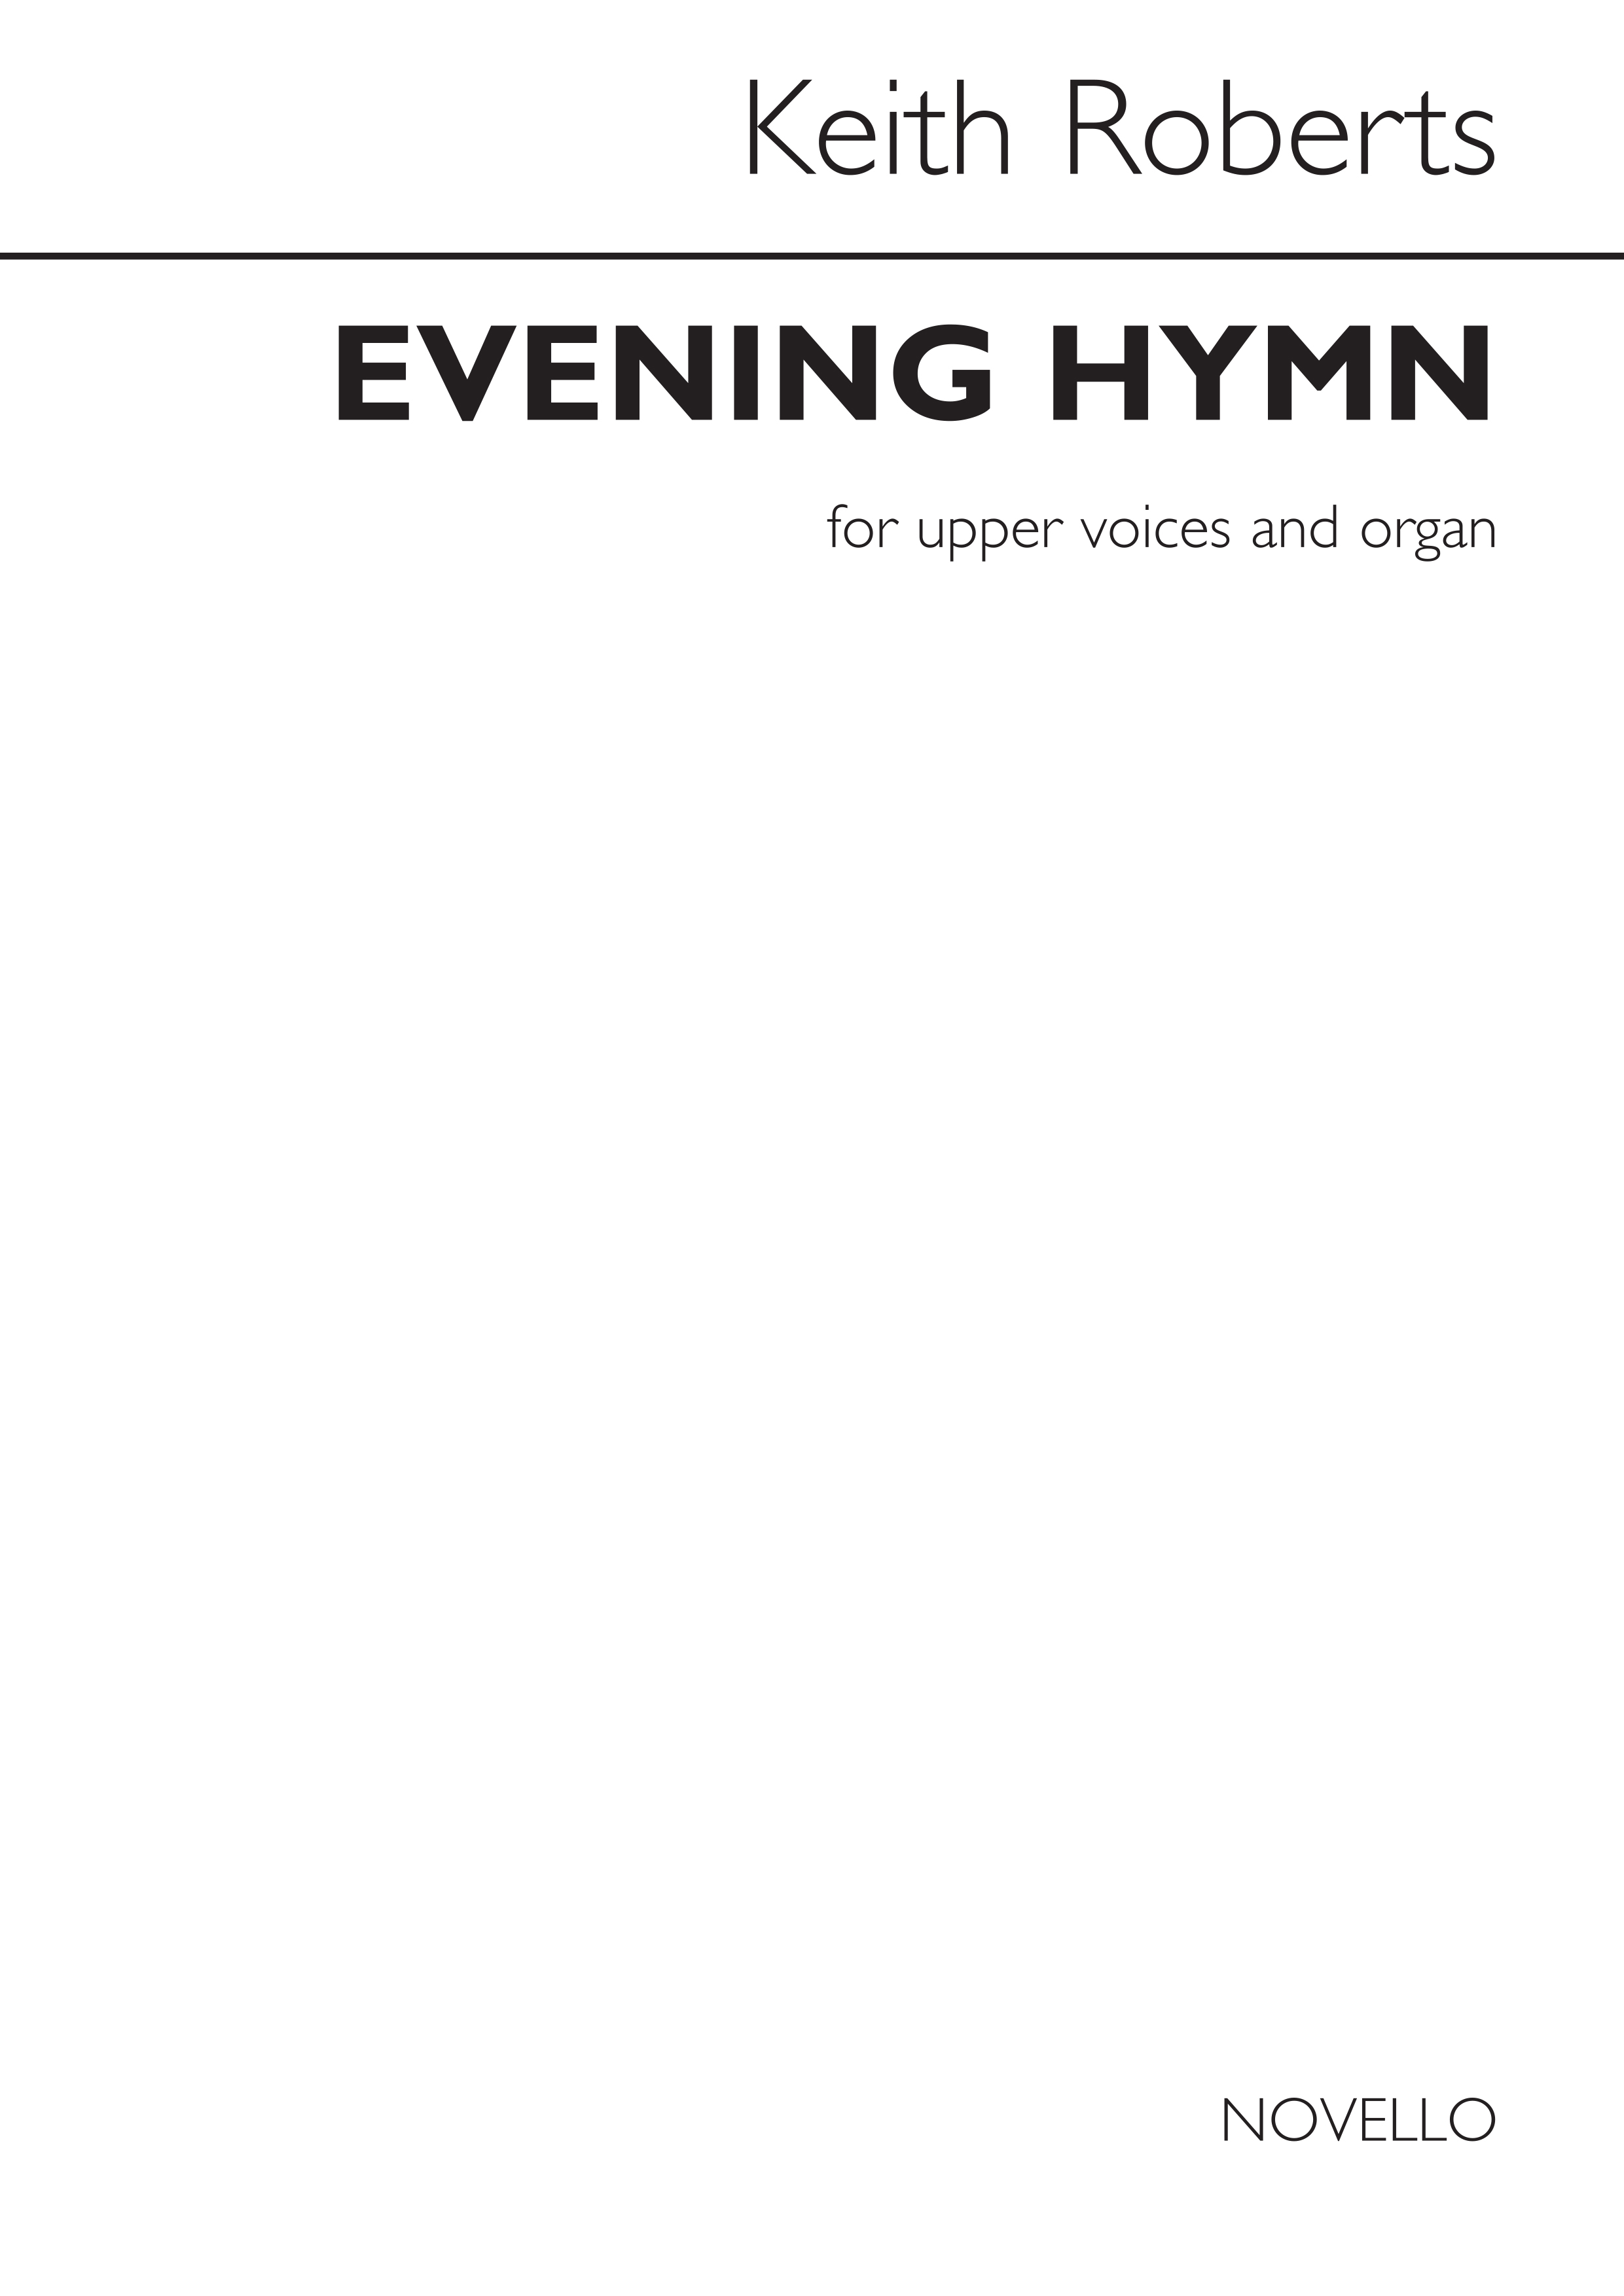 Keith Roberts: Keith Roberts: Evening Hymn: Upper Voices: Vocal Score